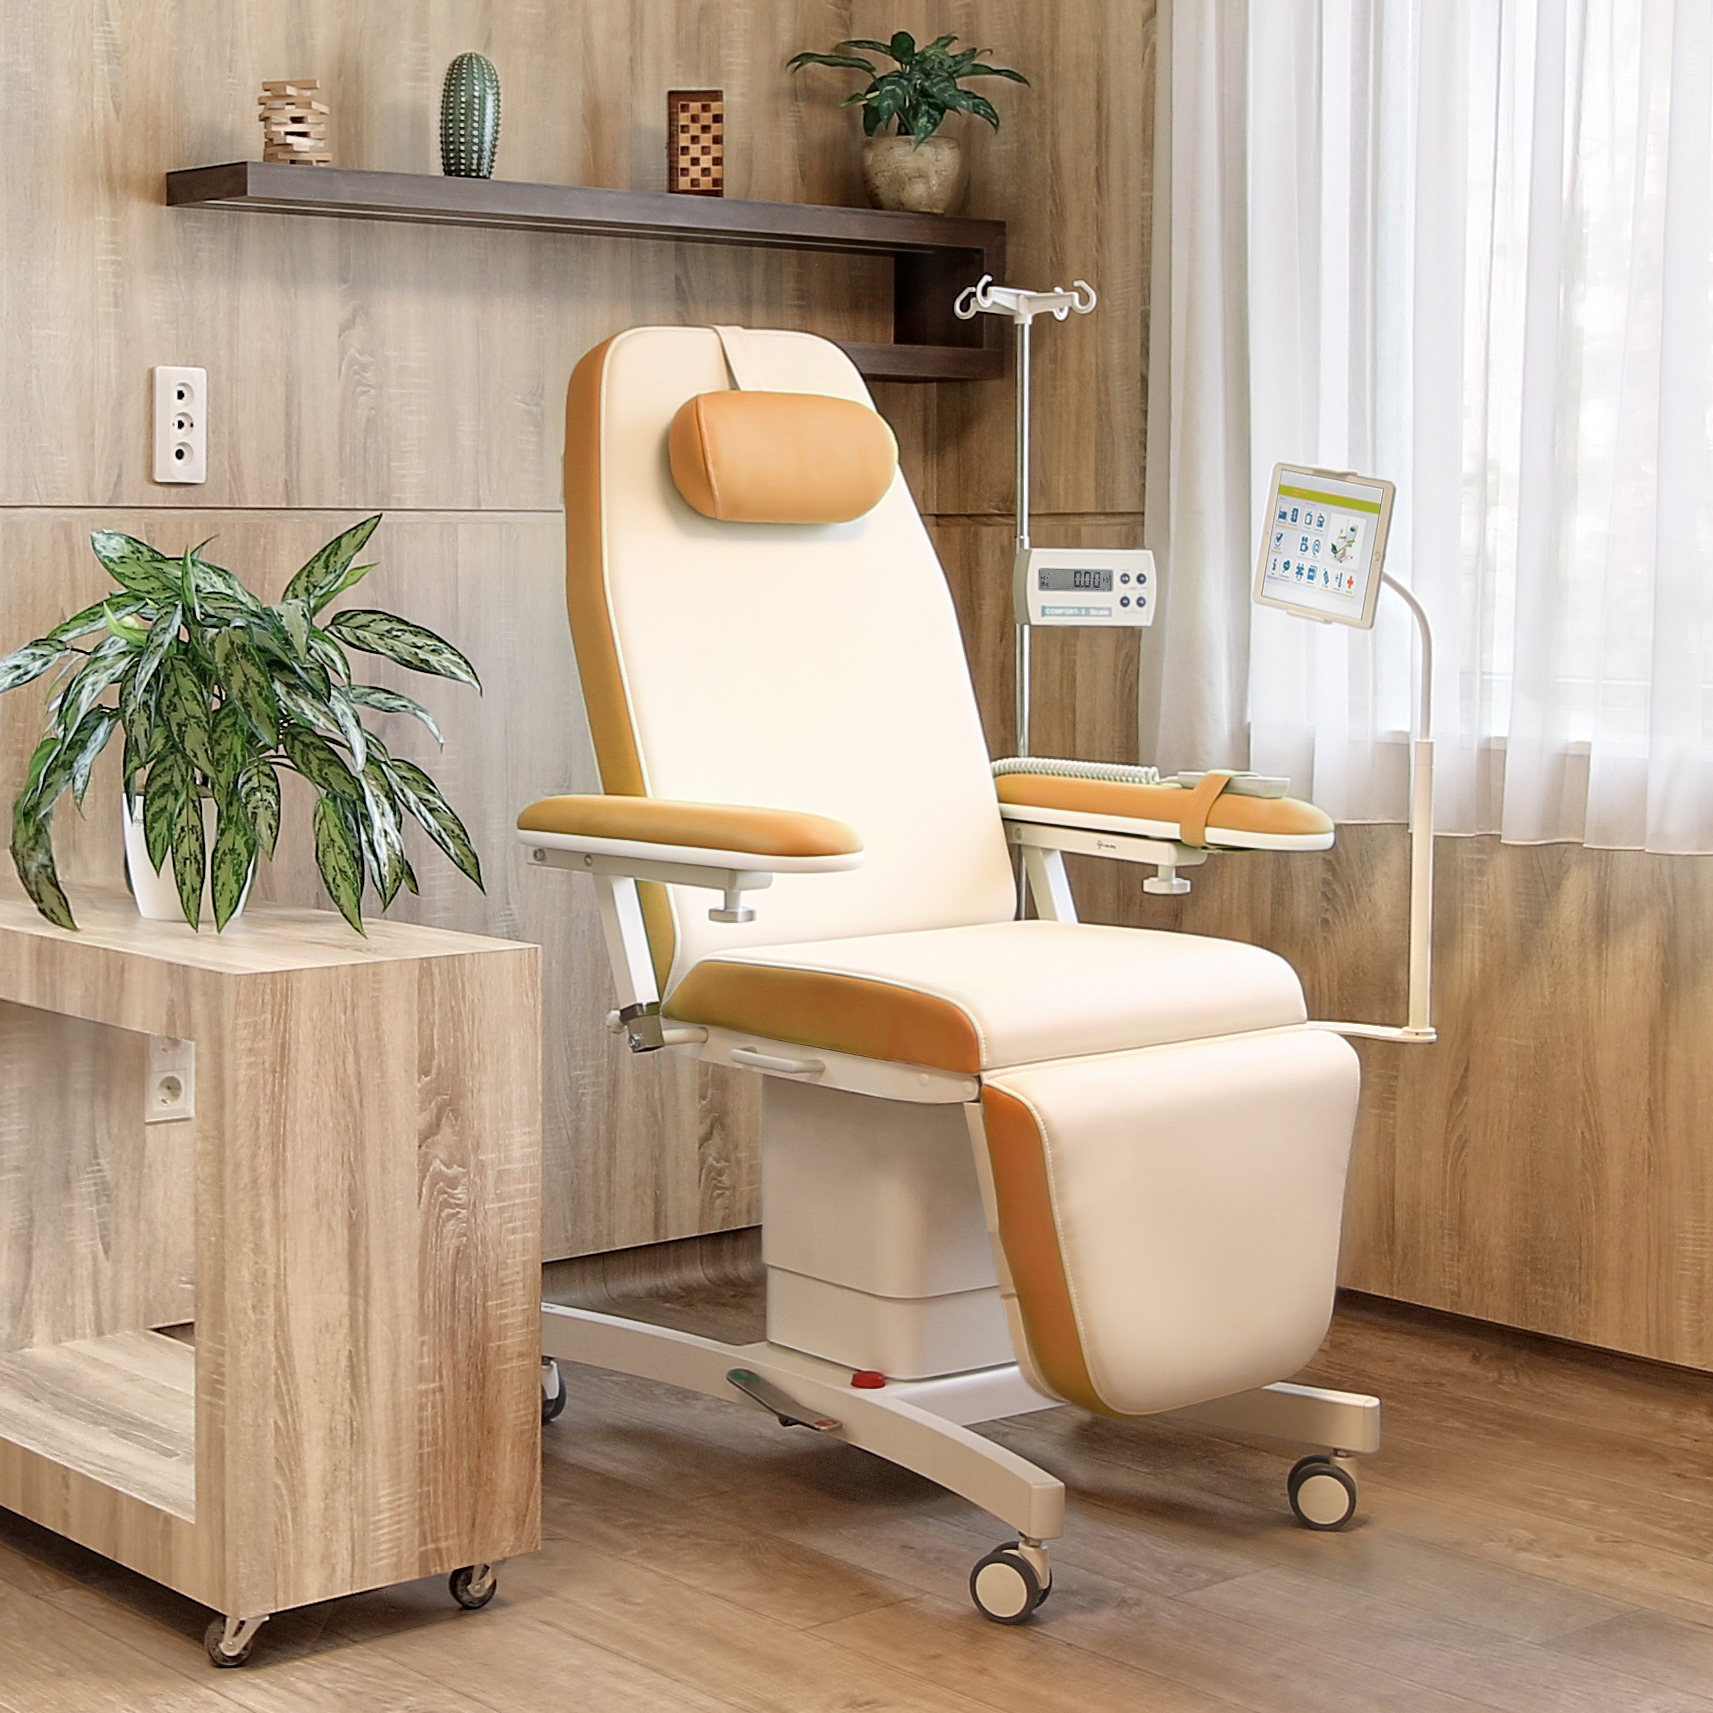 Comfort-3 Eco Therapy-chair with tablet